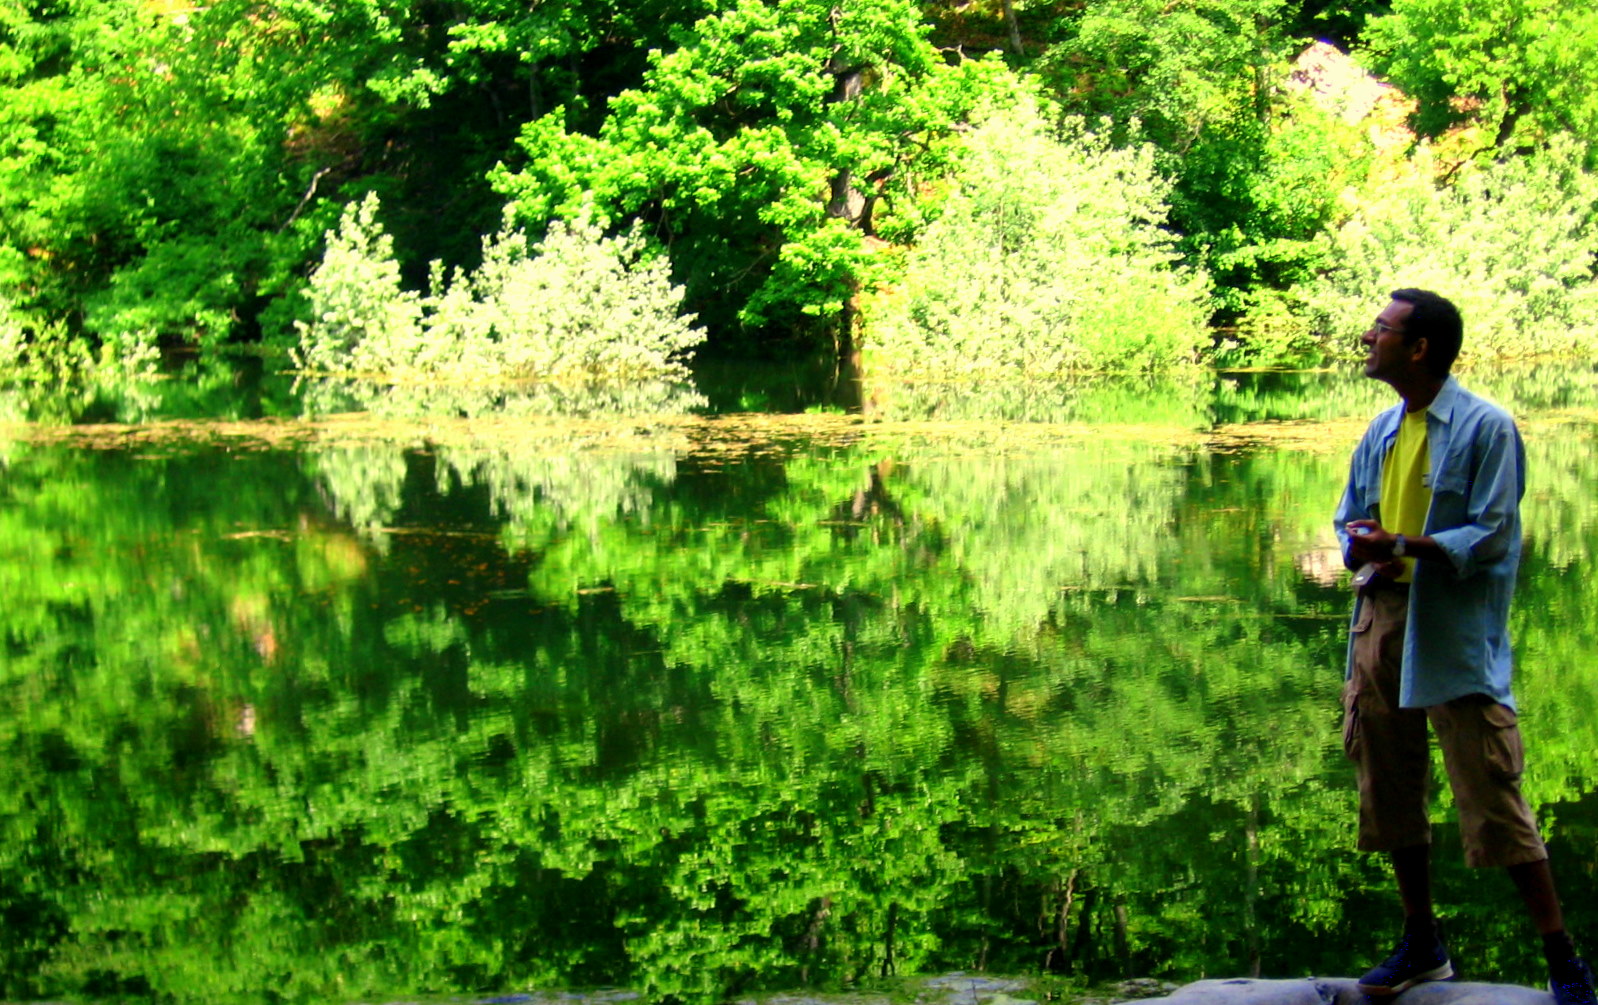 a man stands near the water with trees in the background